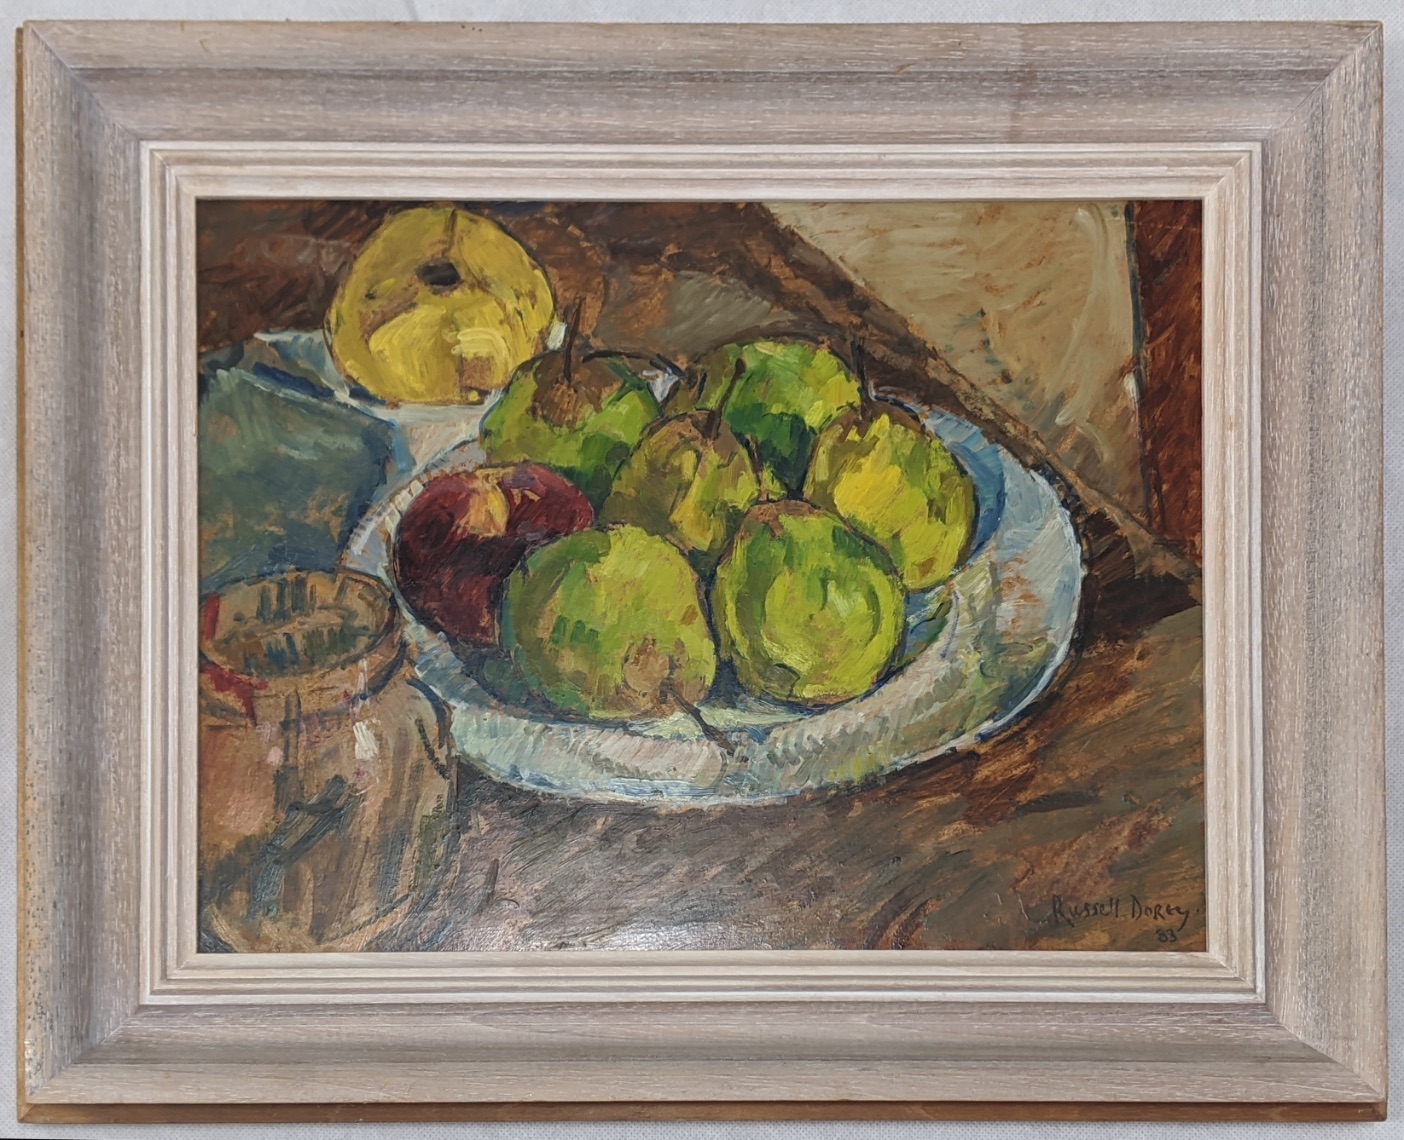 Russell Dorey (20th century British School), Still Life of Pears, 1983, oil on board, signed lower - Image 4 of 4